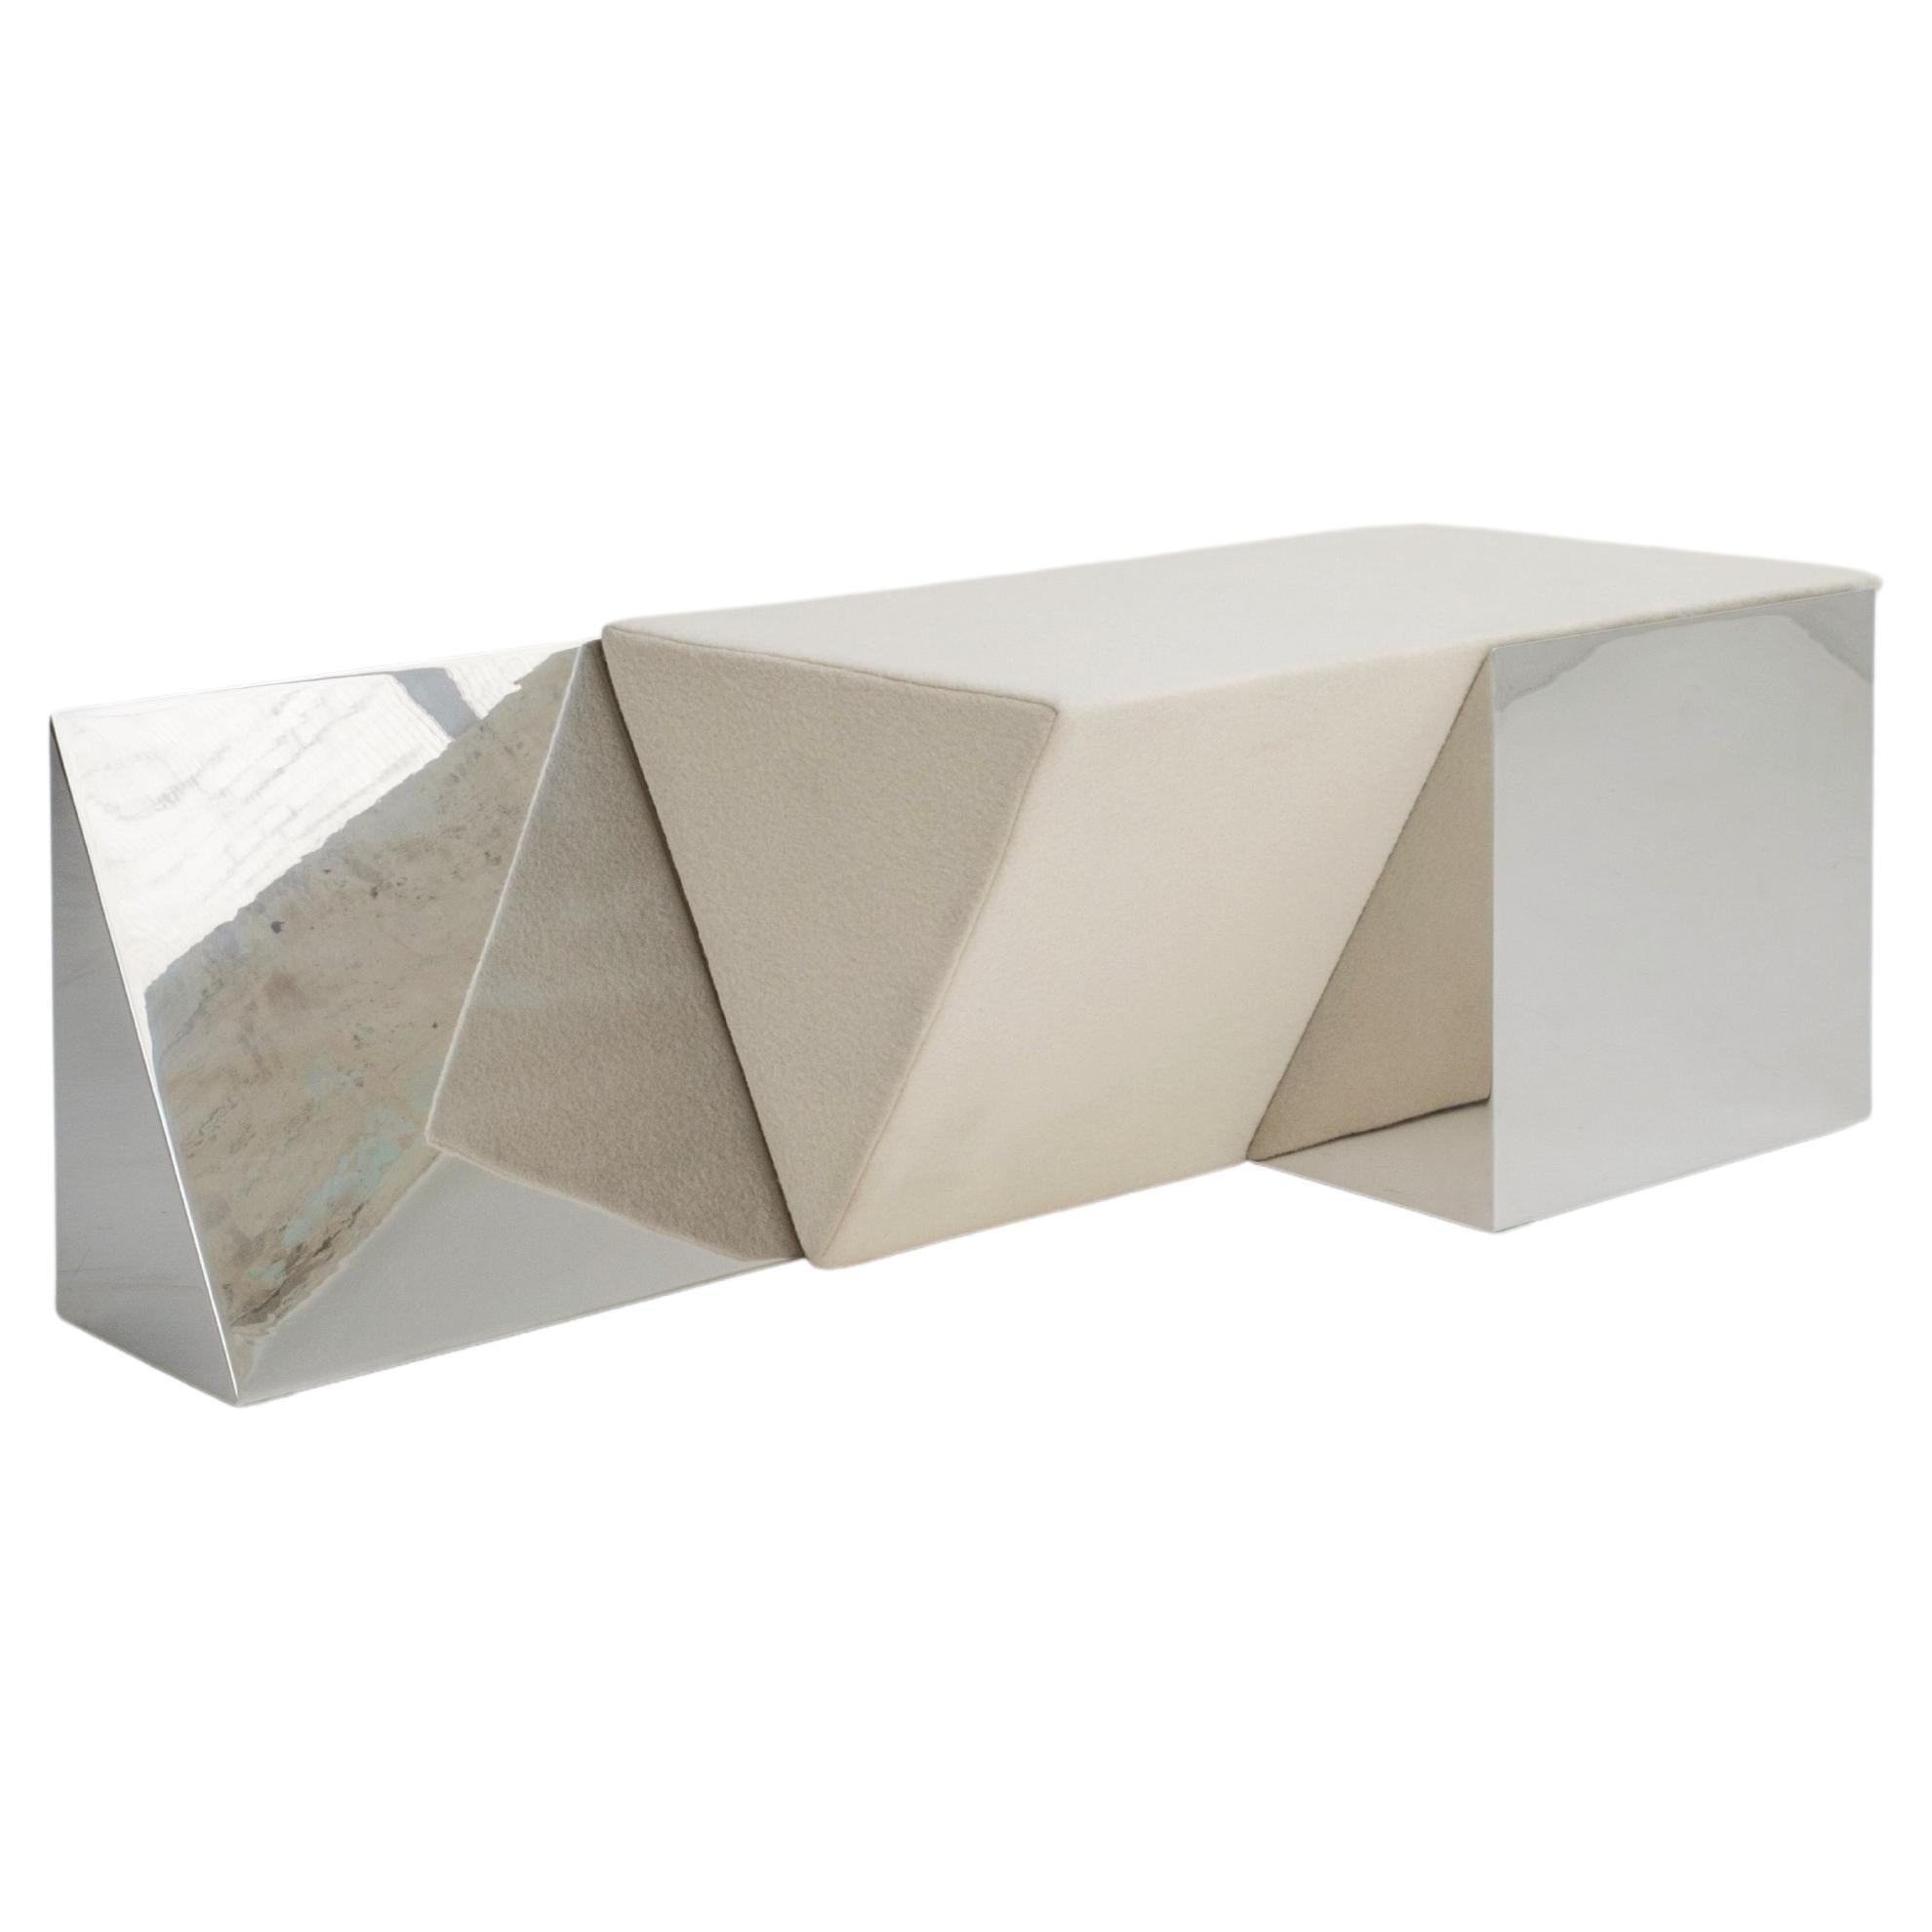 Miljevina Bench Medium in Mirror-Polished Stainless Steel and Upholstery